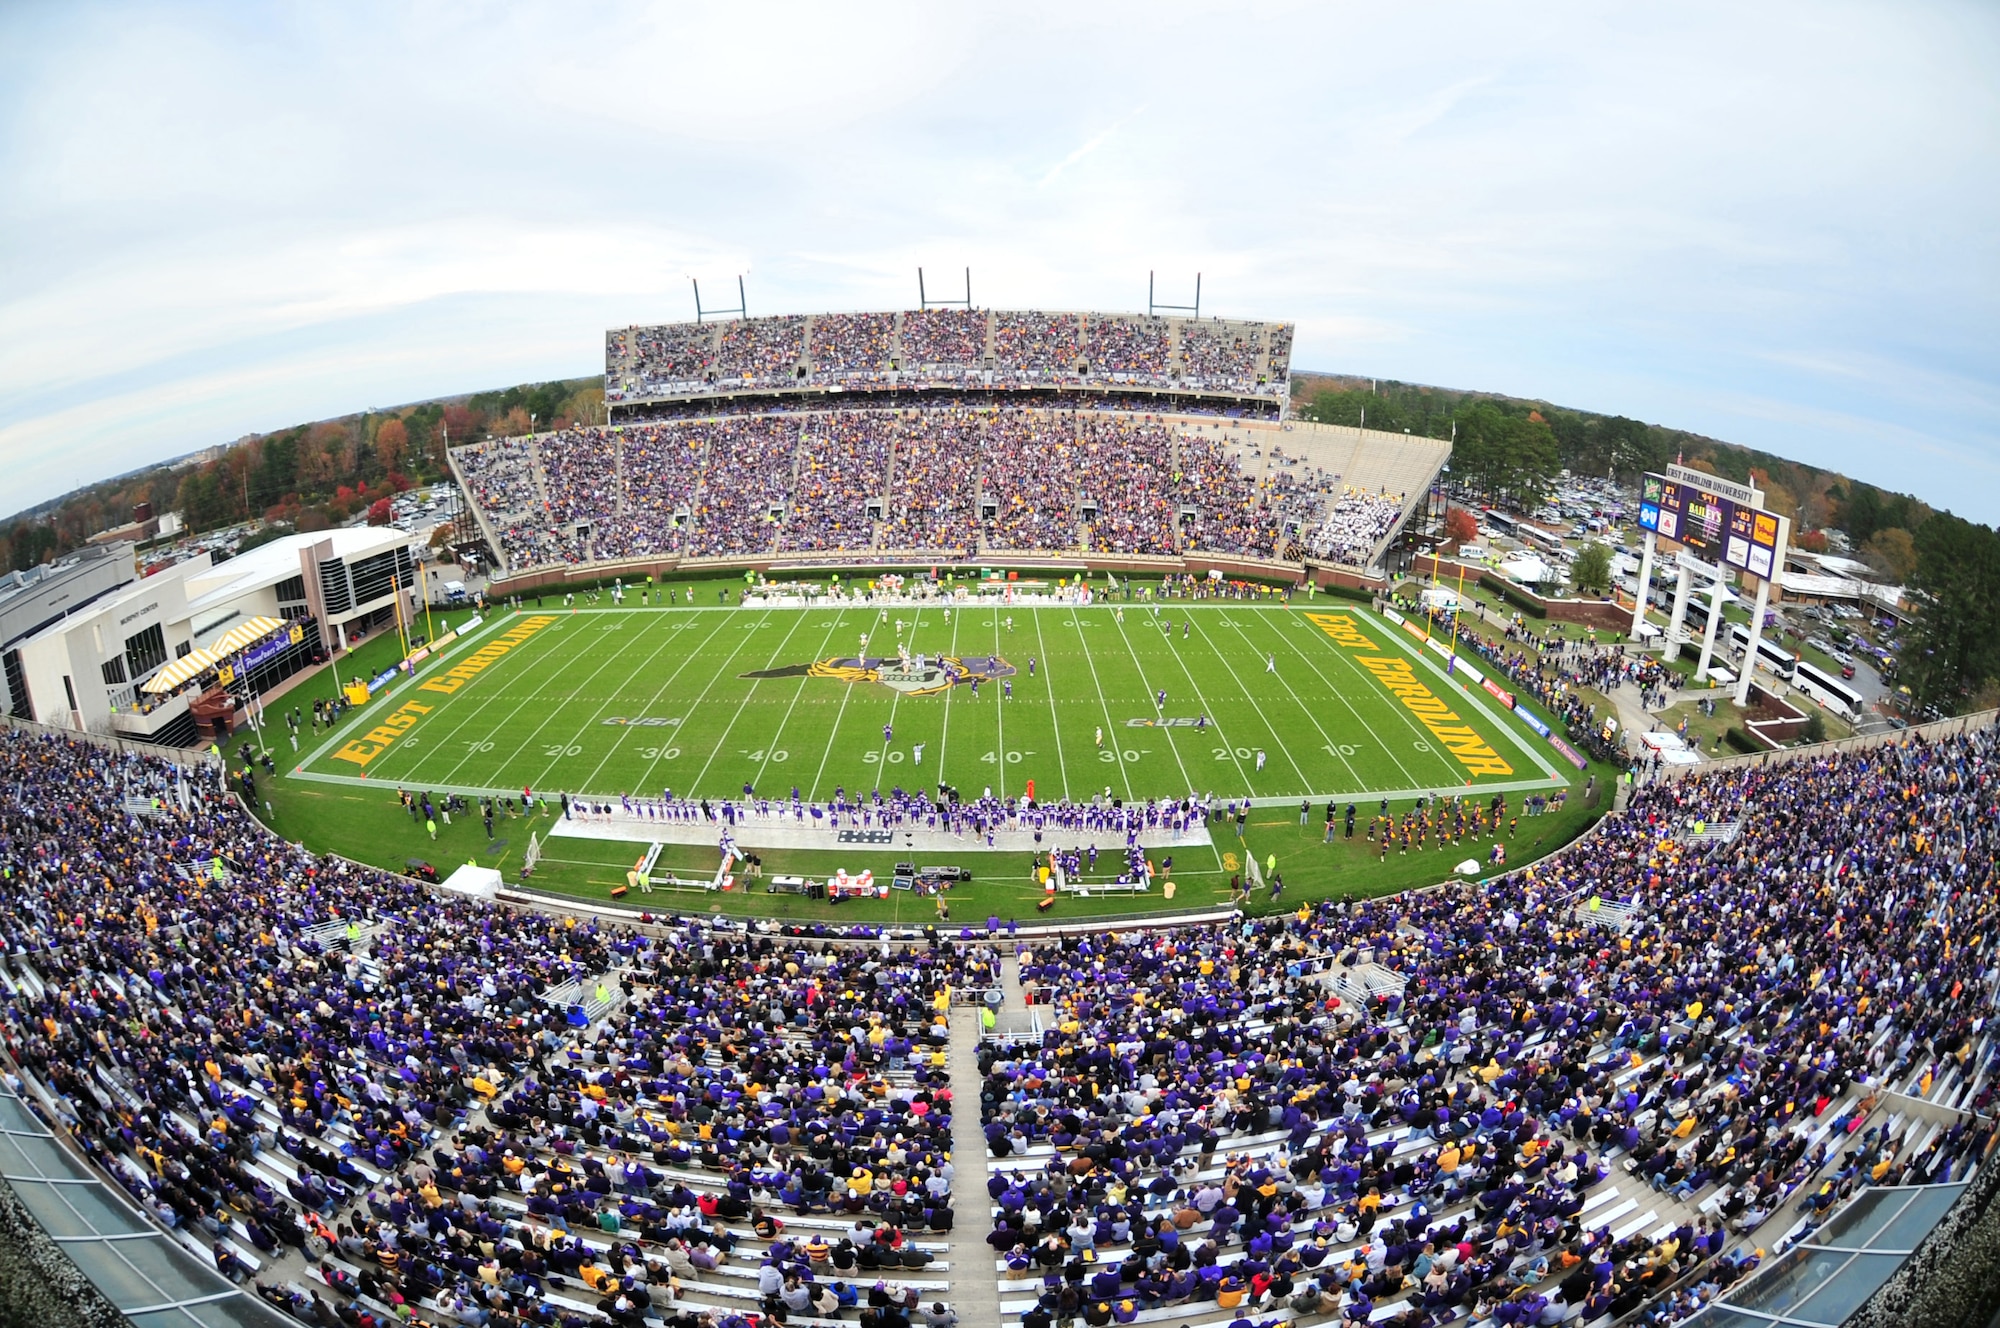 East Carolina University Dowdy-Ficklen Stadium is packed with the school's colors of purple and gold for Military Appreciation Day Nov. 21, 2009. ECU defeated the University of Alabama at Birmingham, 37 to 21. (U.S. Air Force photo/Airman 1st Class Rae Perry)